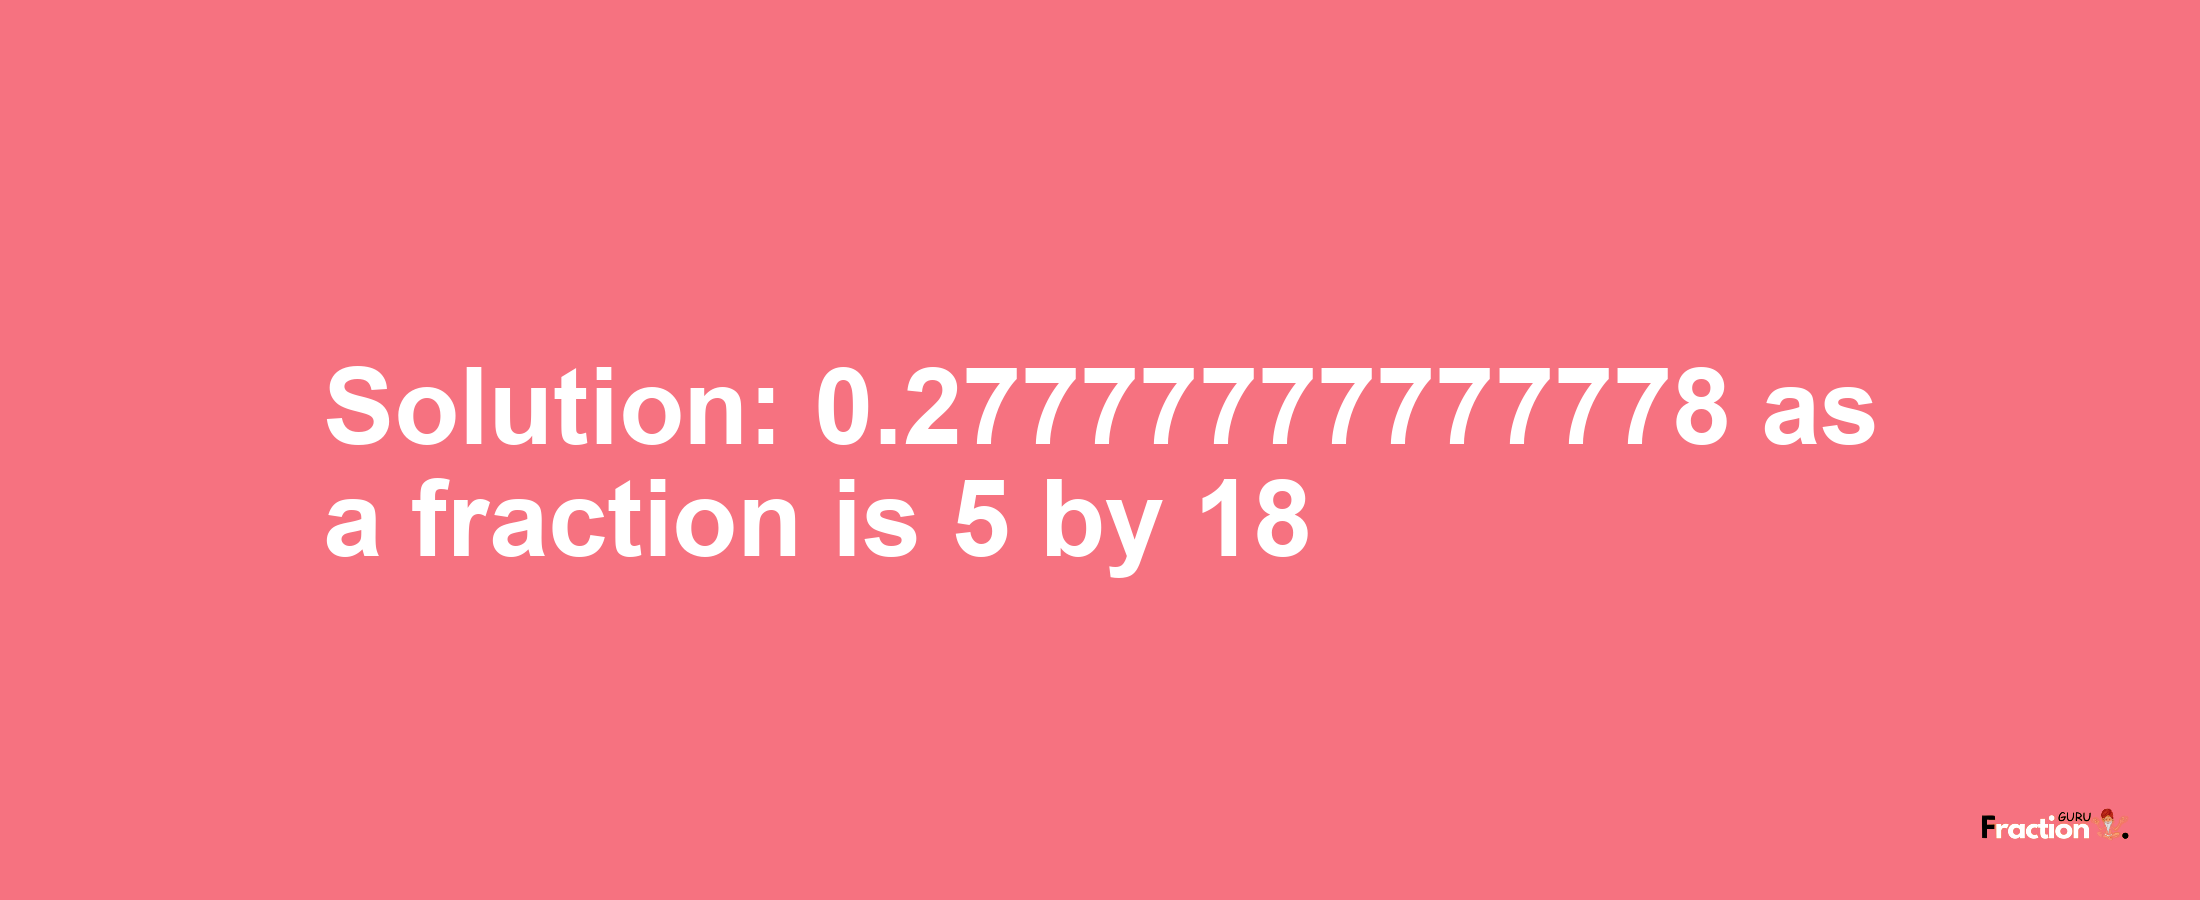 Solution:0.27777777777778 as a fraction is 5/18